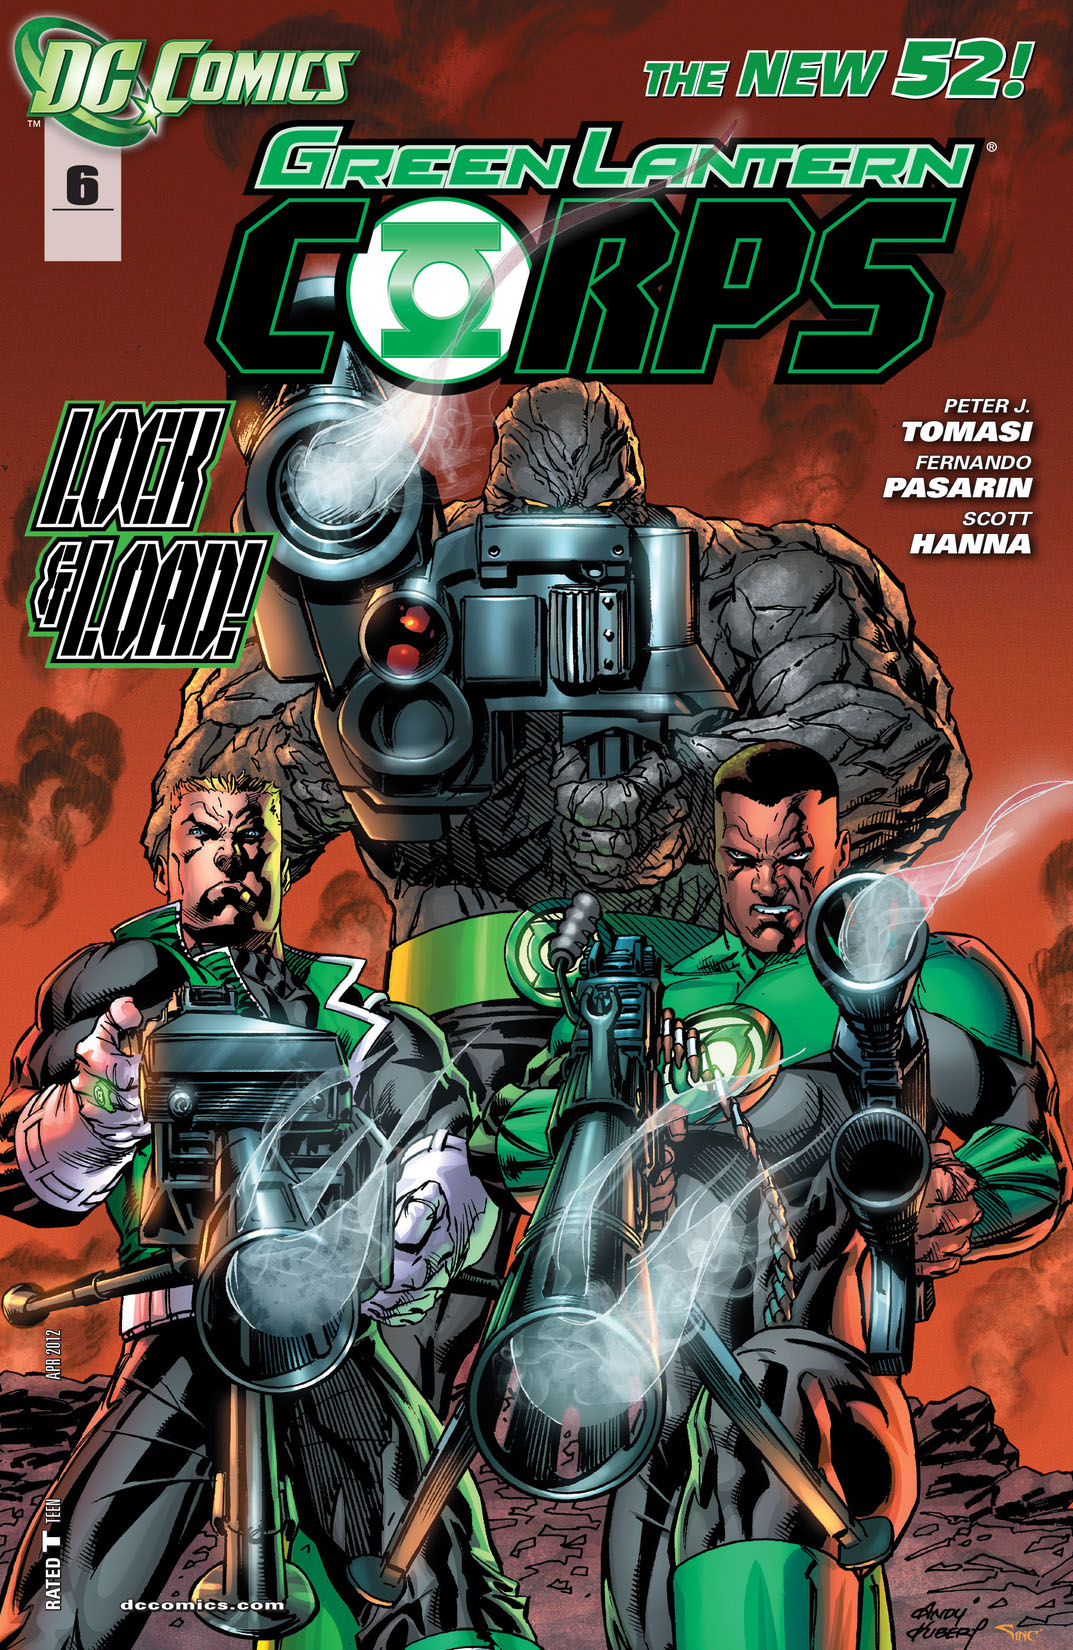 Green Lantern Corps (2011-) #6 preview images